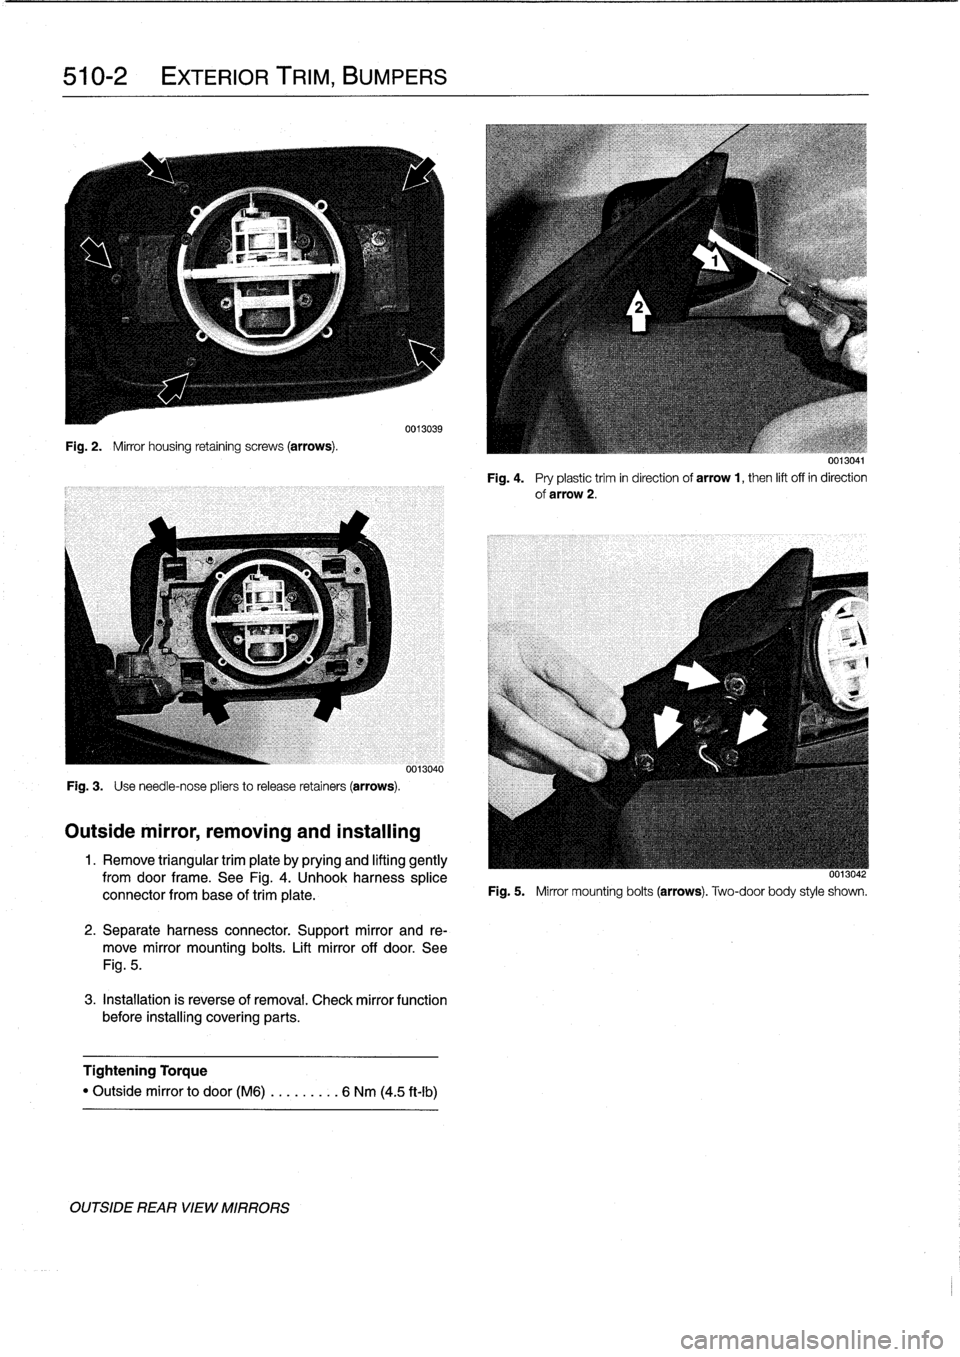 BMW 328i 1995 E36 Workshop Manual 
510-2

	

EXTERIOR
TRIIVI,
BUMPERS

Fig
.
2
.

	

Mirror
housing
retaining
screws
(arrows)
.

Fig
.
3
.

	

Use
need1e-nose
pliers
to
release
retainers
(arrows)
.

Outside
mirror,
removing
and
instal